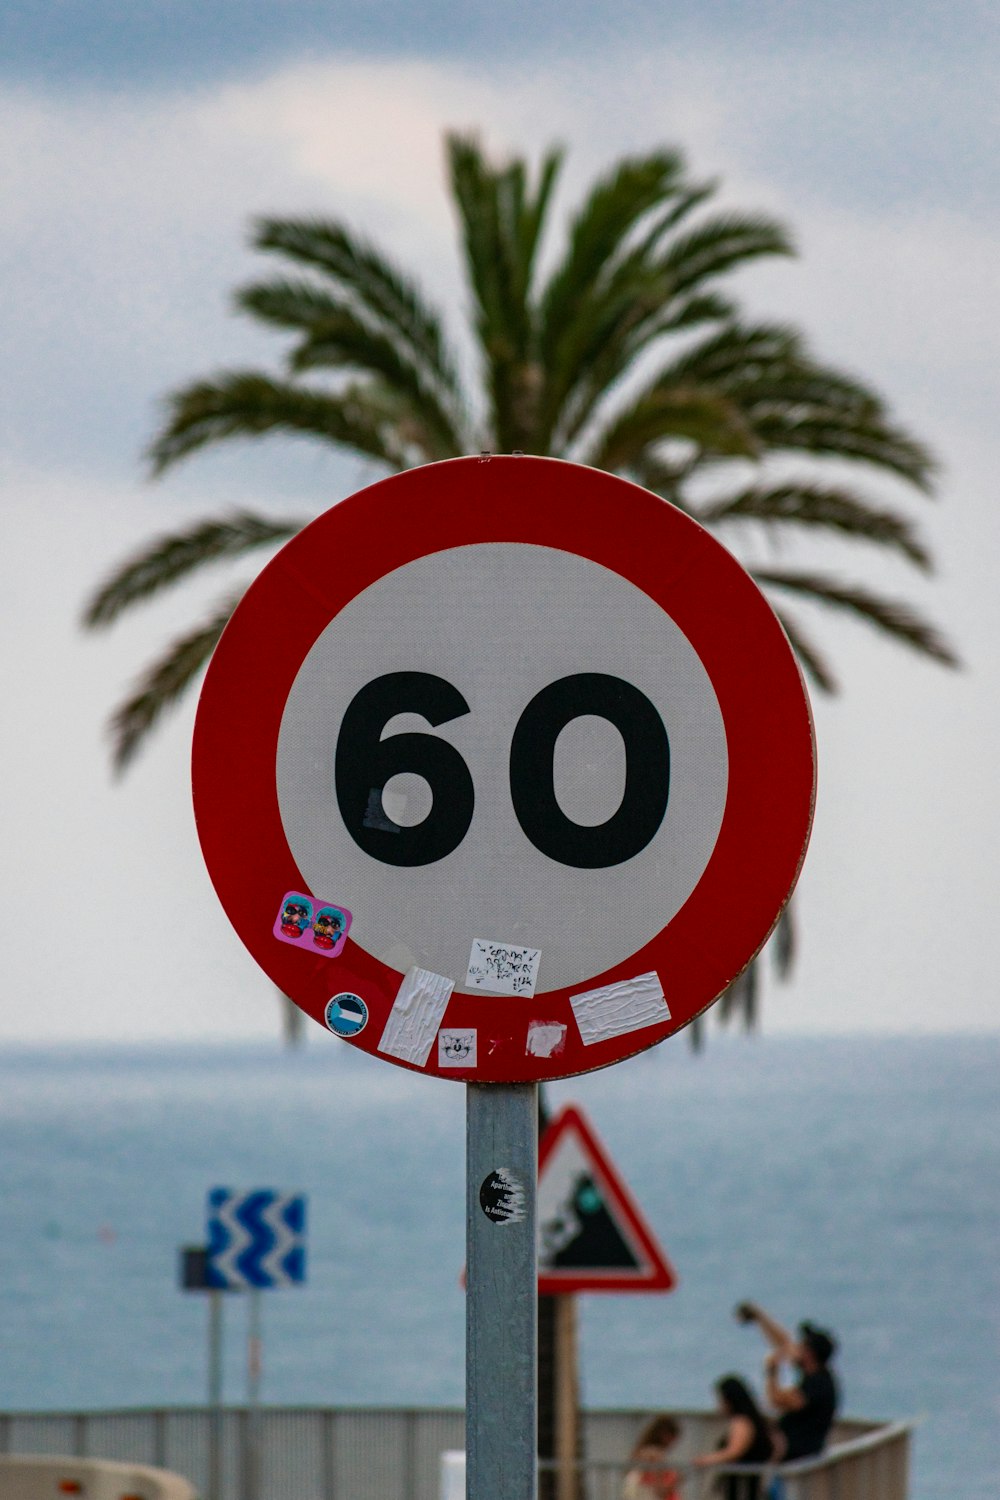 a close up of a street sign with a palm tree in the background